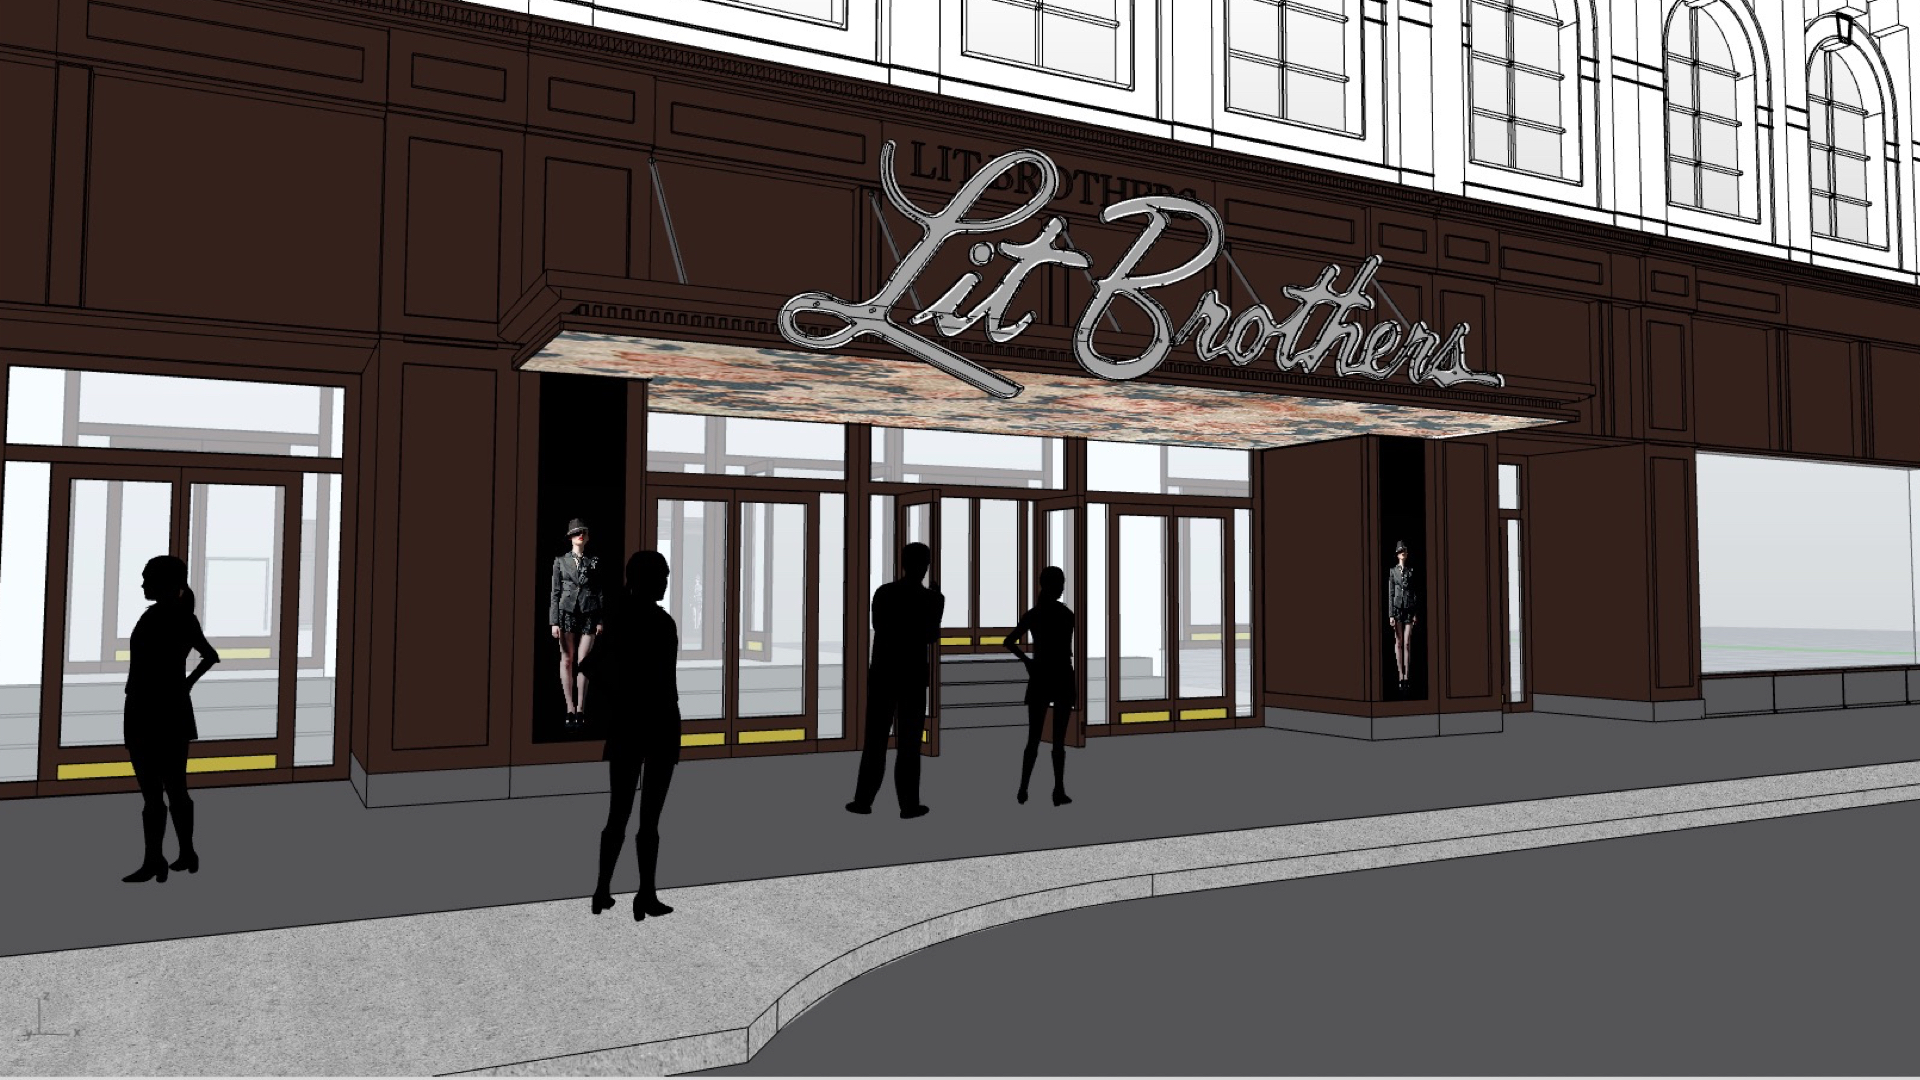 Proposal for new entry signage on Lit Brothers building | Brickstone Realty